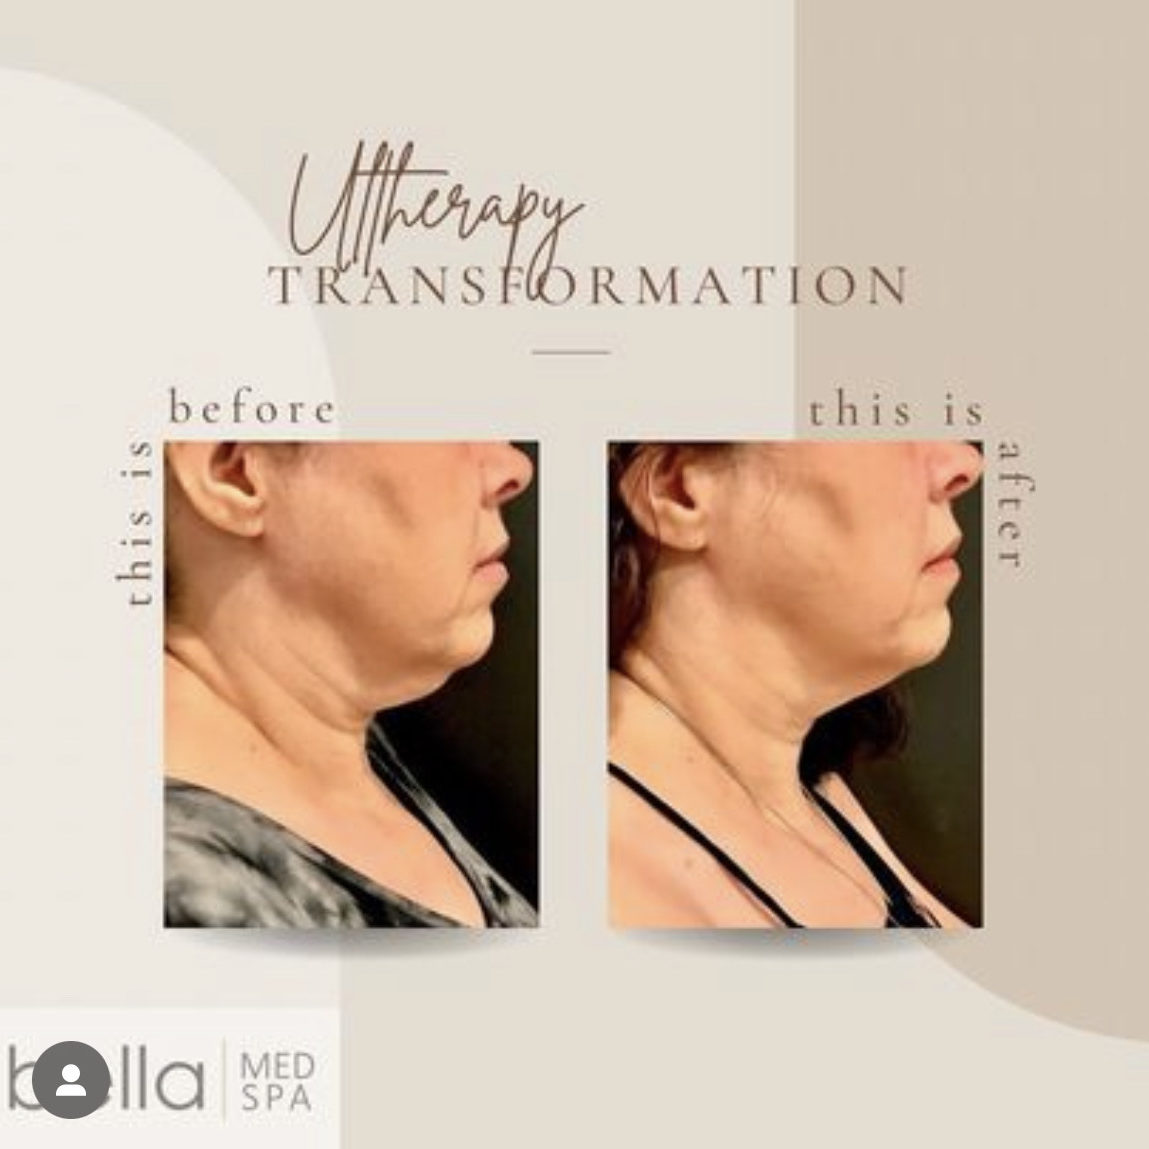 Before And After Ultherapy Transformation | Clarksville, TN | Bella Med Spa